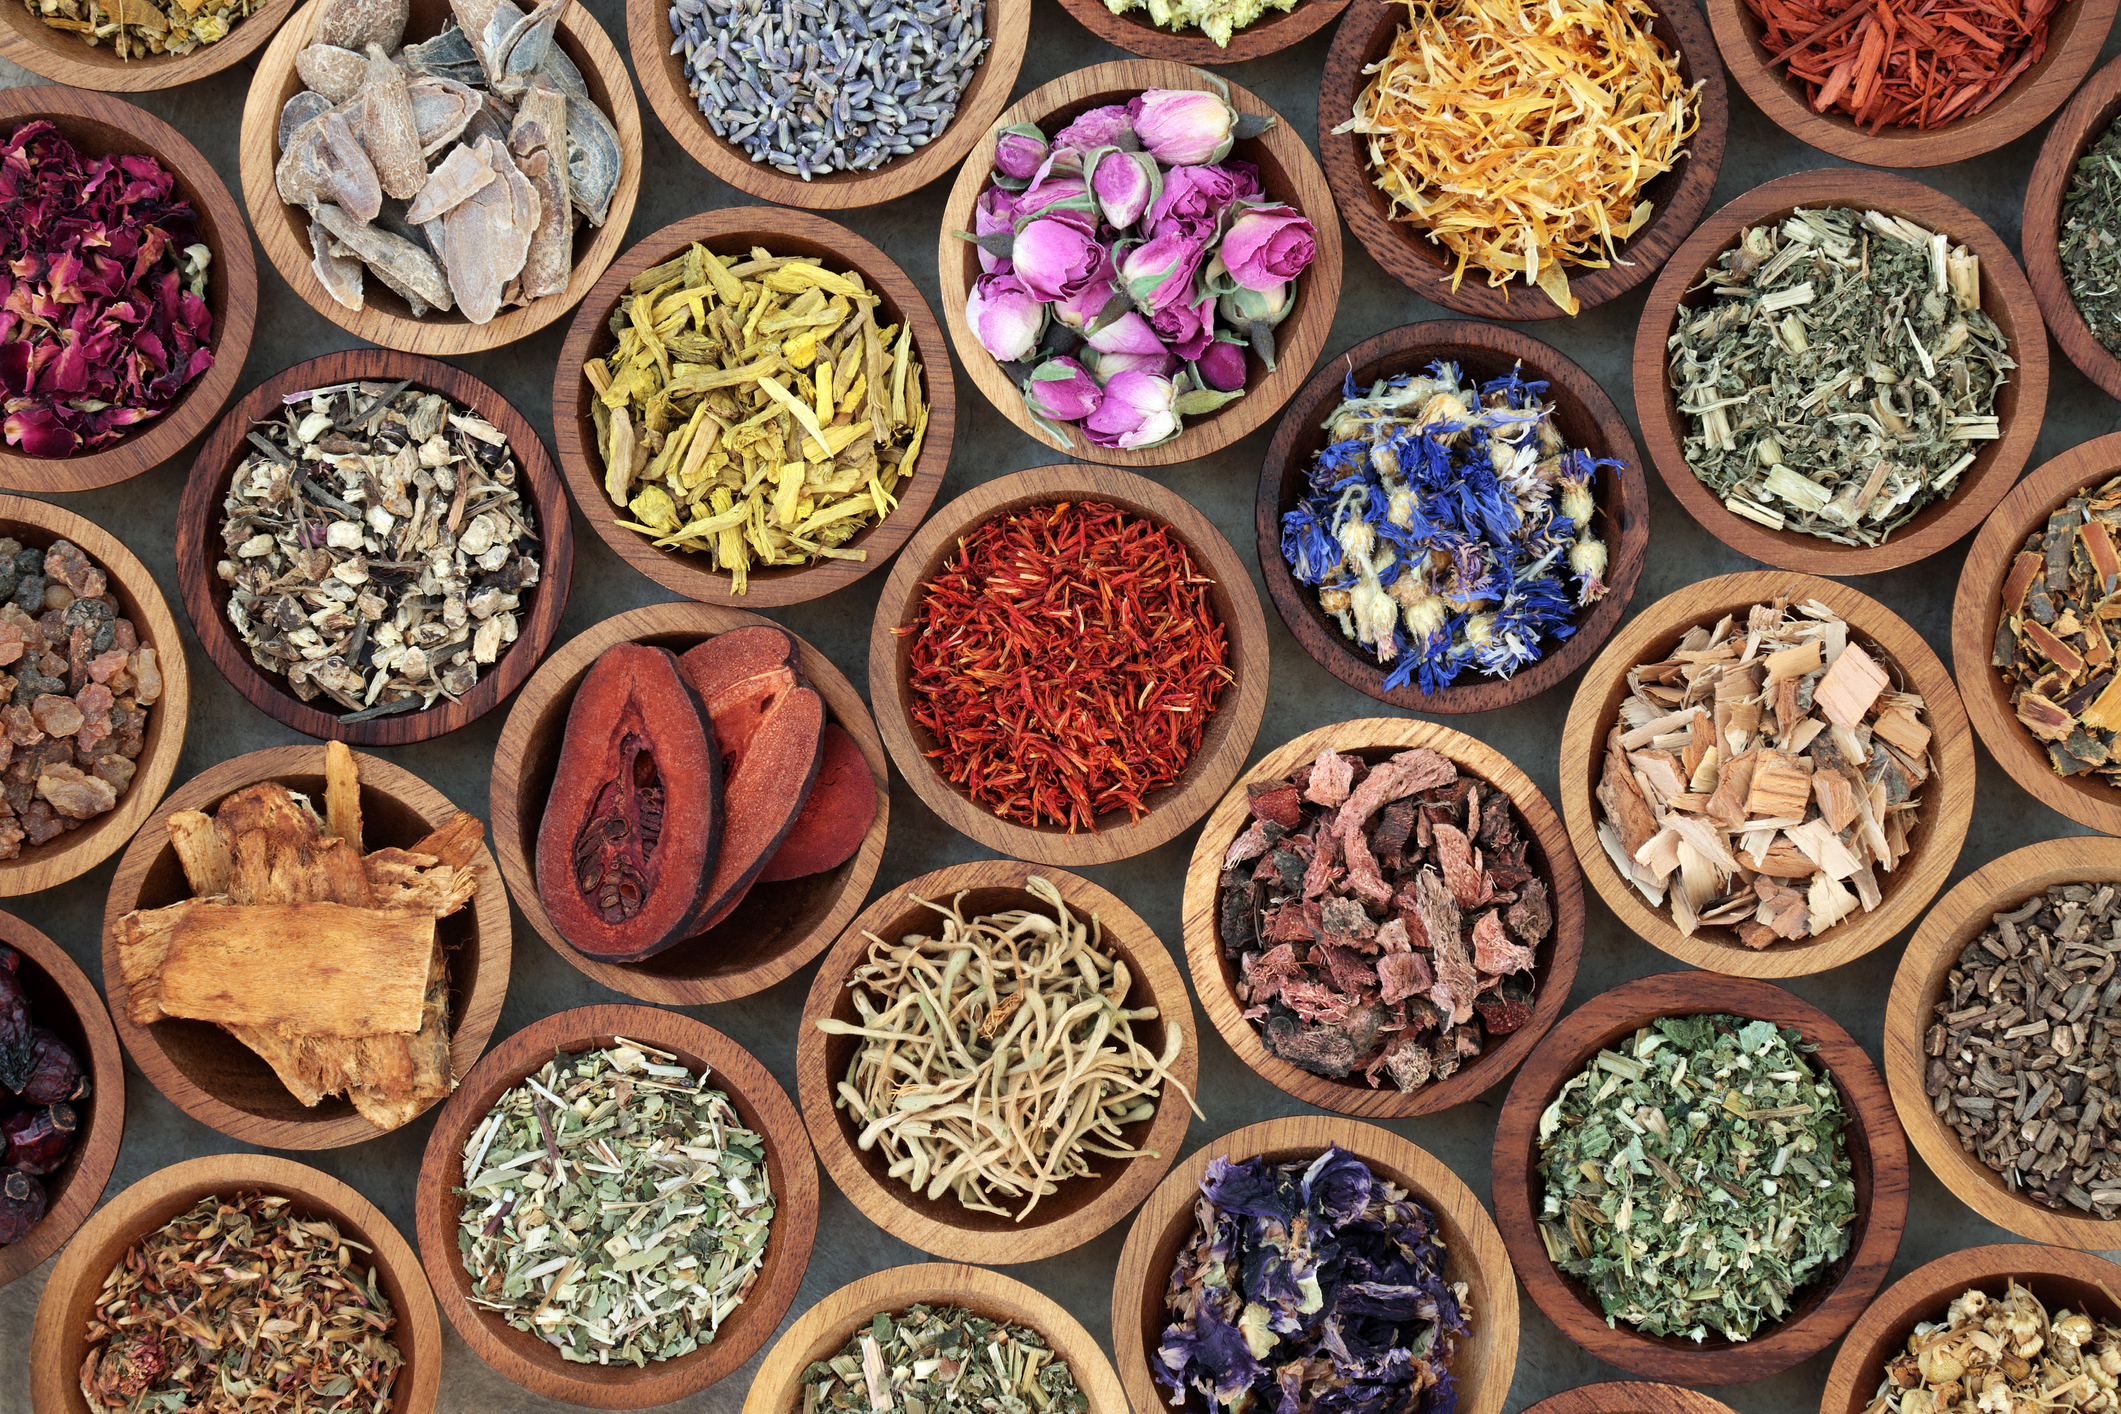 Ayurveda herbs & spices